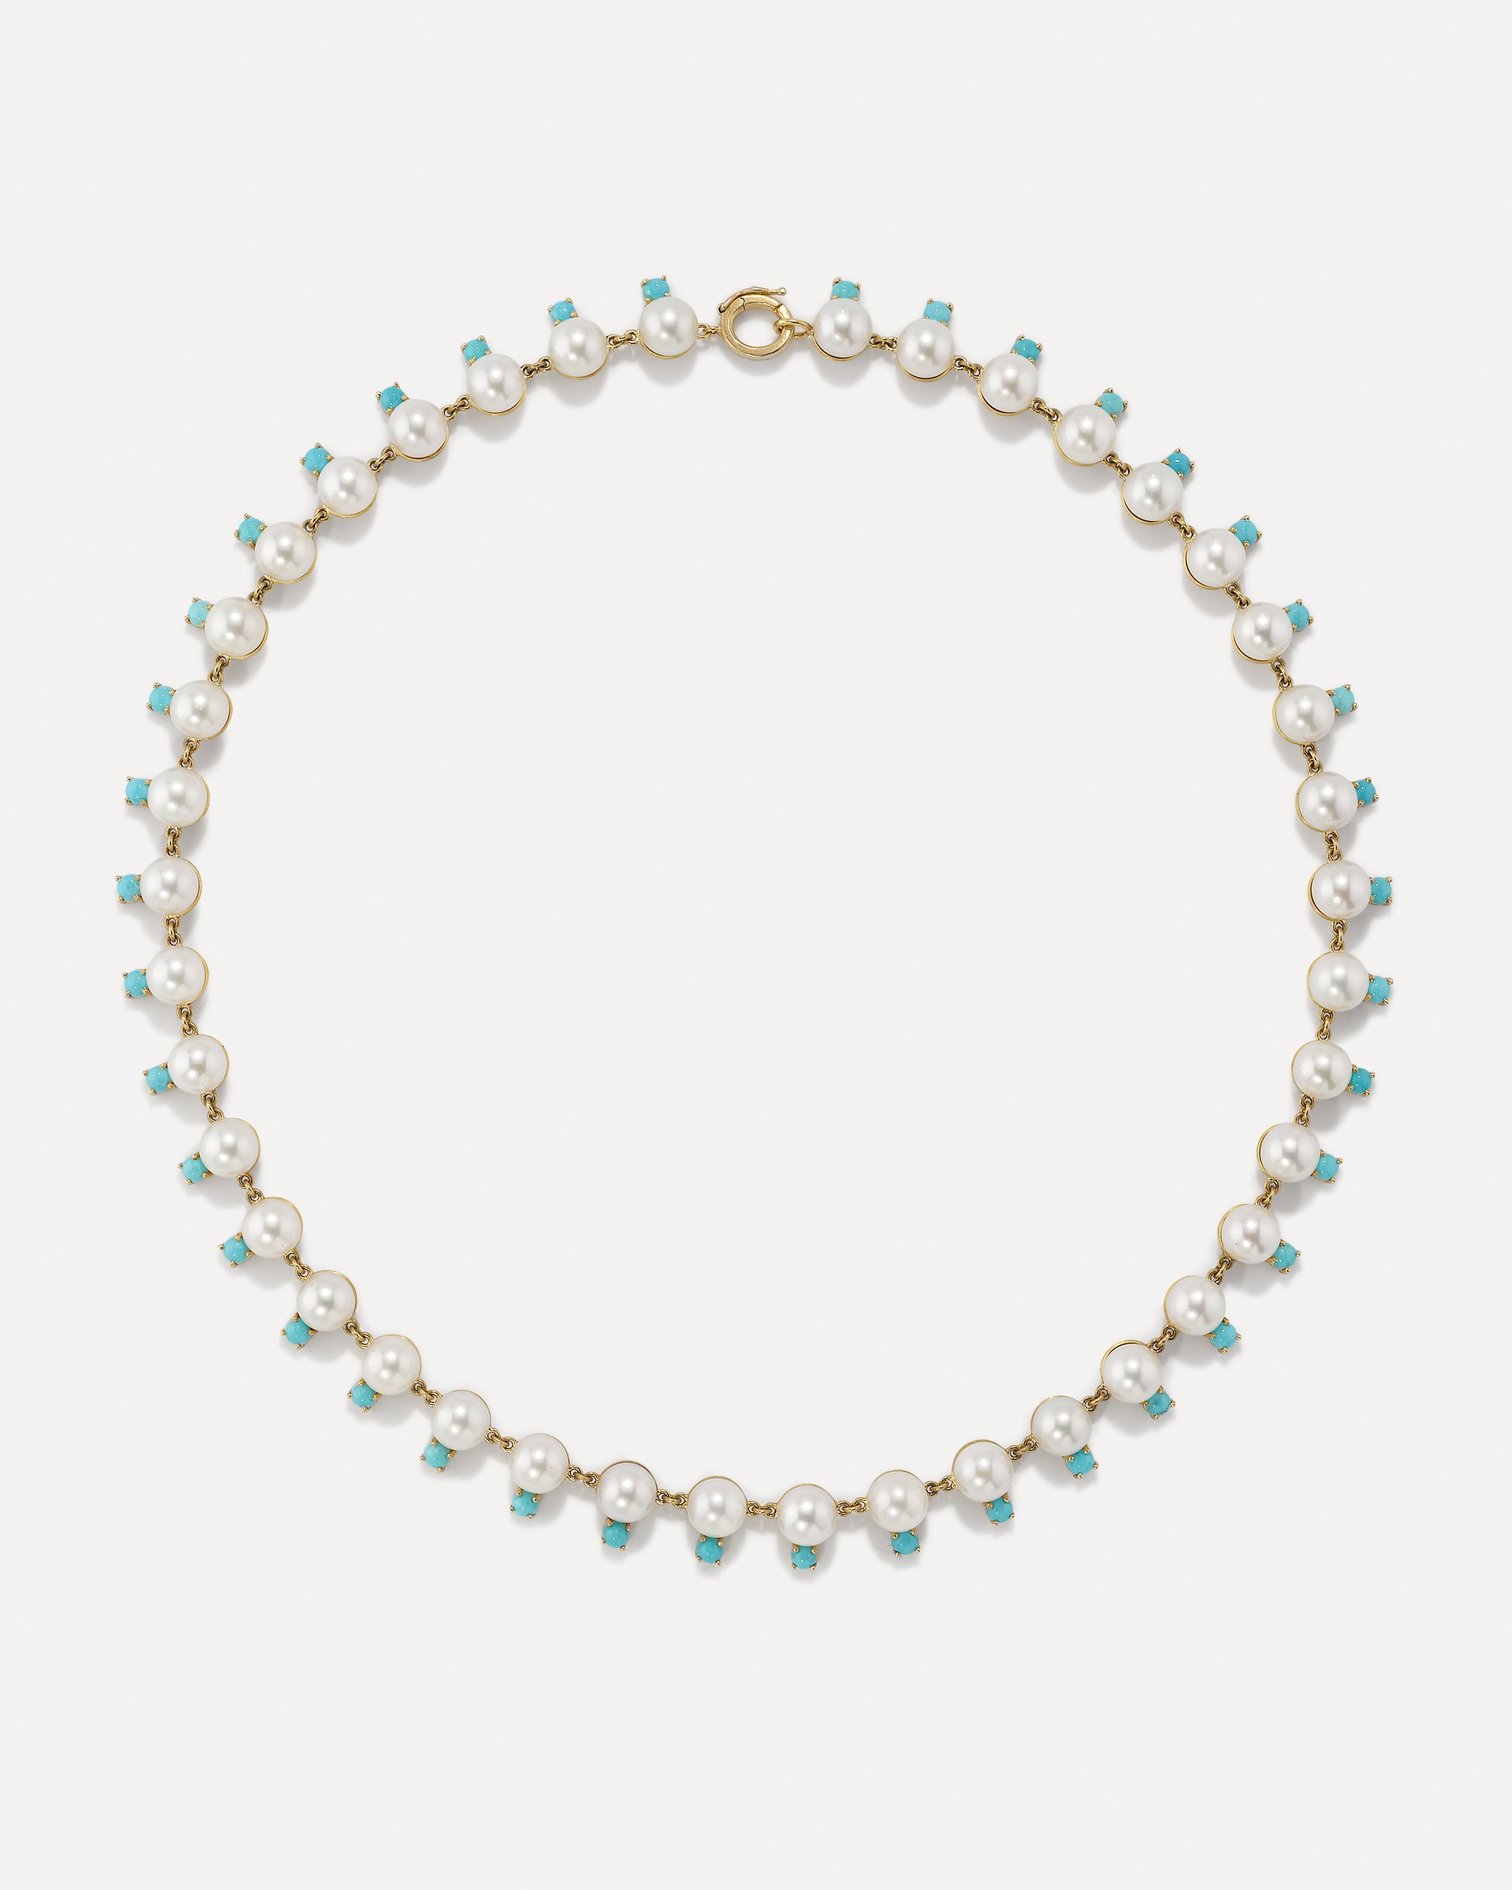 Irene Neuwirth Pearl and Turquoise Necklace